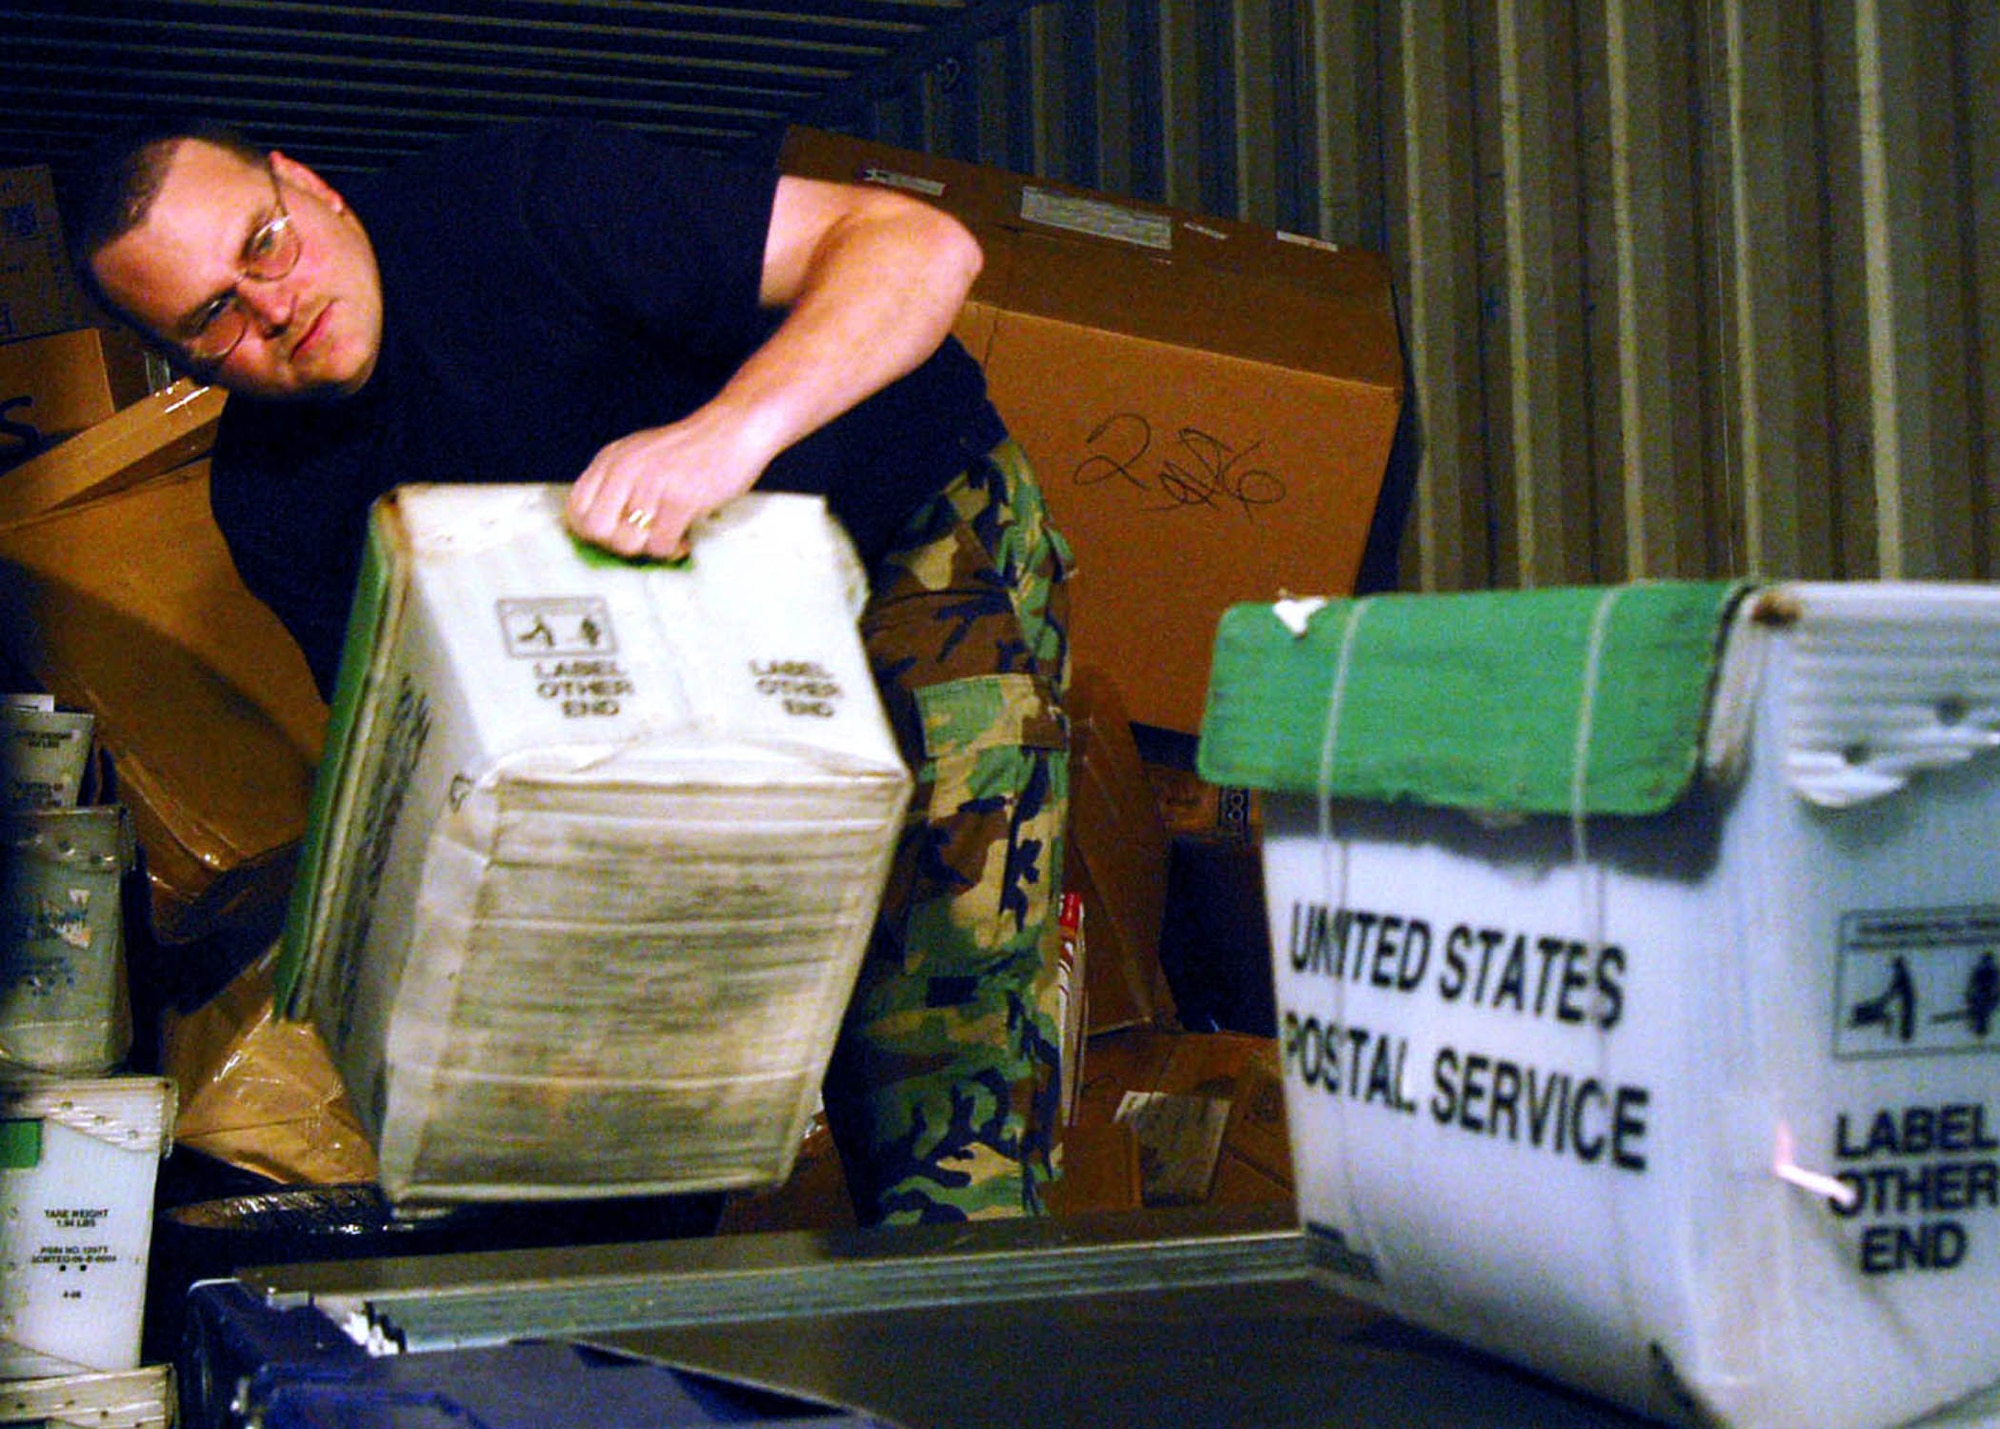 SPANGDALHEM AIR BASE, Germany –Staff Sgt. Royce Johnson, 52nd Communications Squadron, unloads a mail truck at the Spangdahlem Air Base post office Nov. 19. All Airmen are members of the 52nd Communications Squadron post office staff. During the holiday season, the approximately 35 person staff of postal Airmen, augmentees, civilians and volunteers process, stock, label and disseminate more than 1.2 million pounds of mail. (U.S. Air Force photo/Staff Sgt. Tammie Moore)